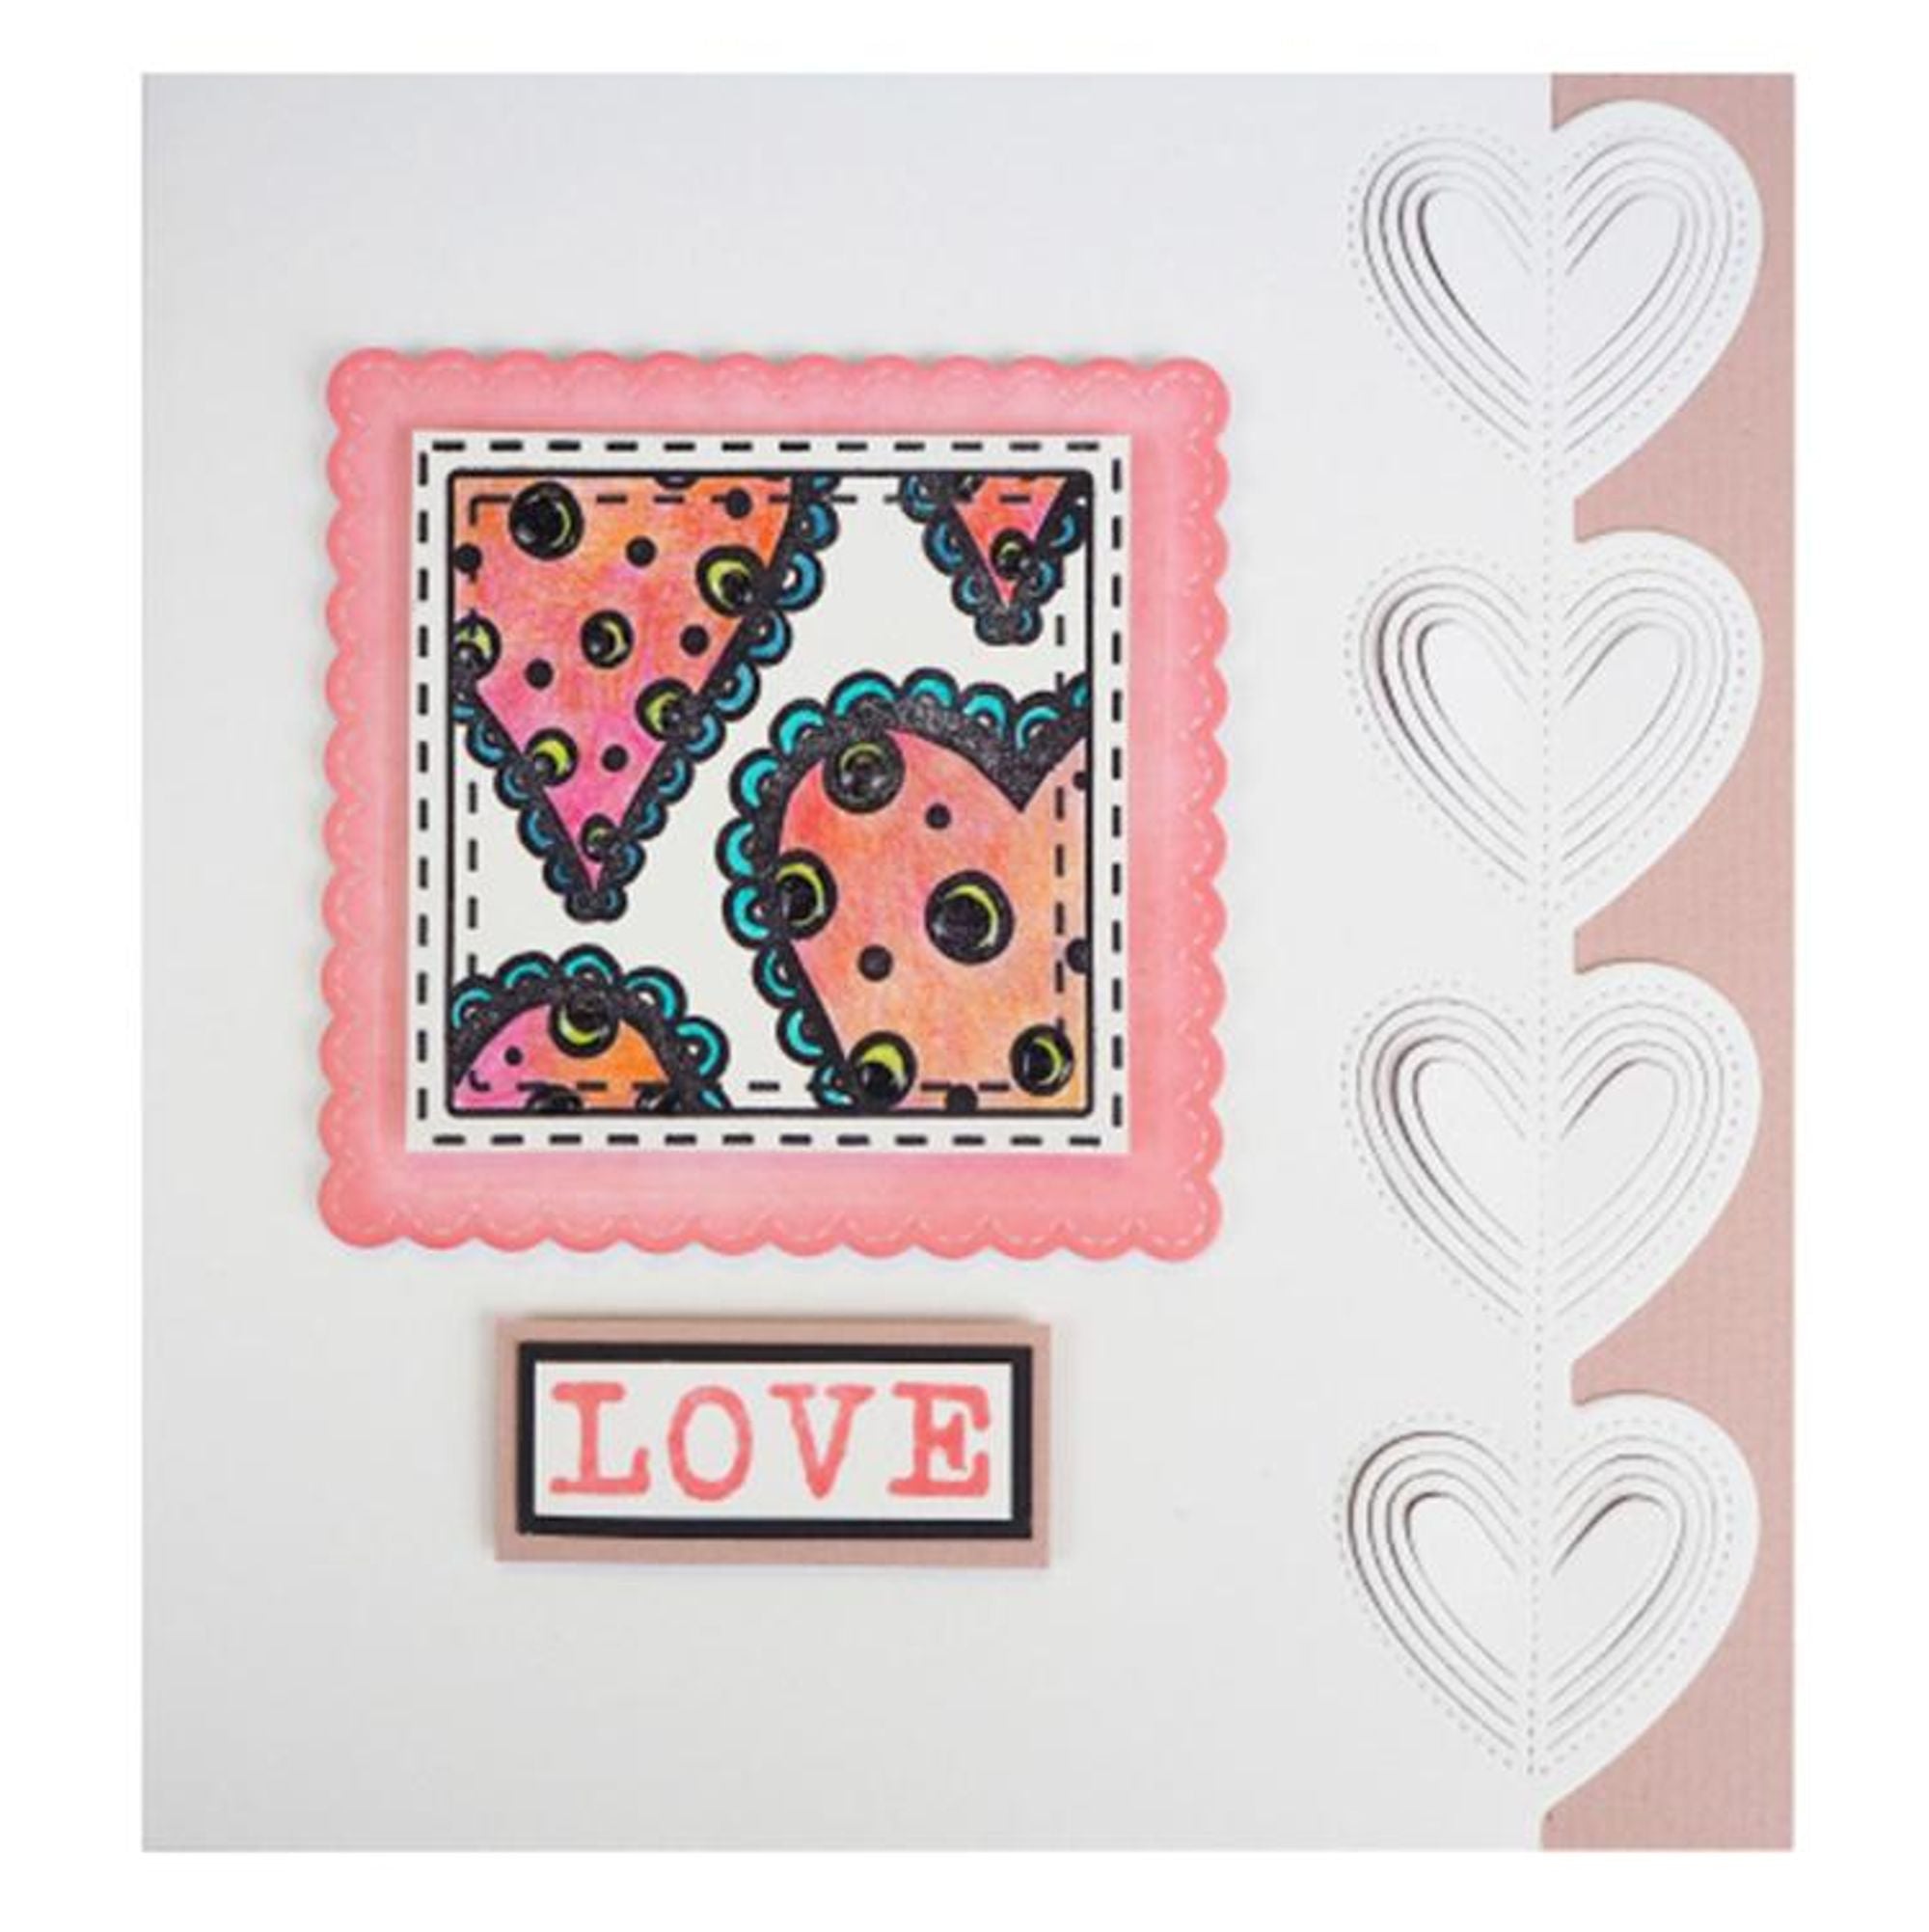 Quilling Pattern heart, Quilling design templates heart - Inspire Uplift